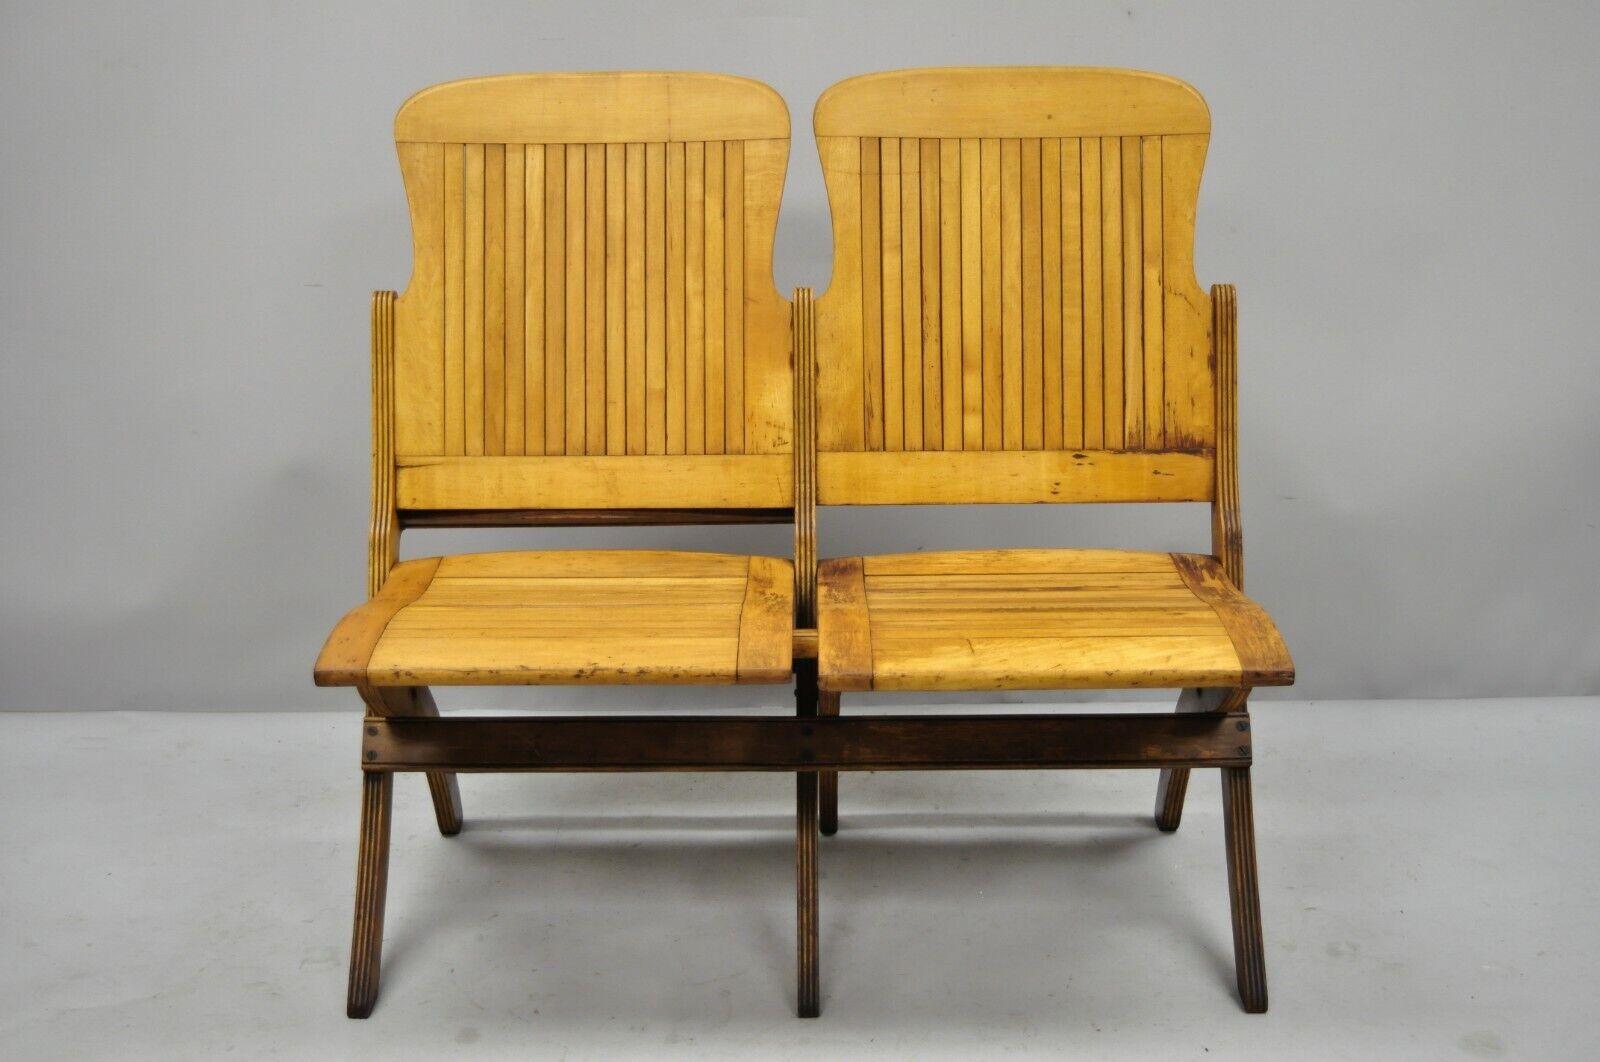 American Craftsman Antique Vintage Wood Slat Double Folding Seat Theater School Old Pew Chair For Sale